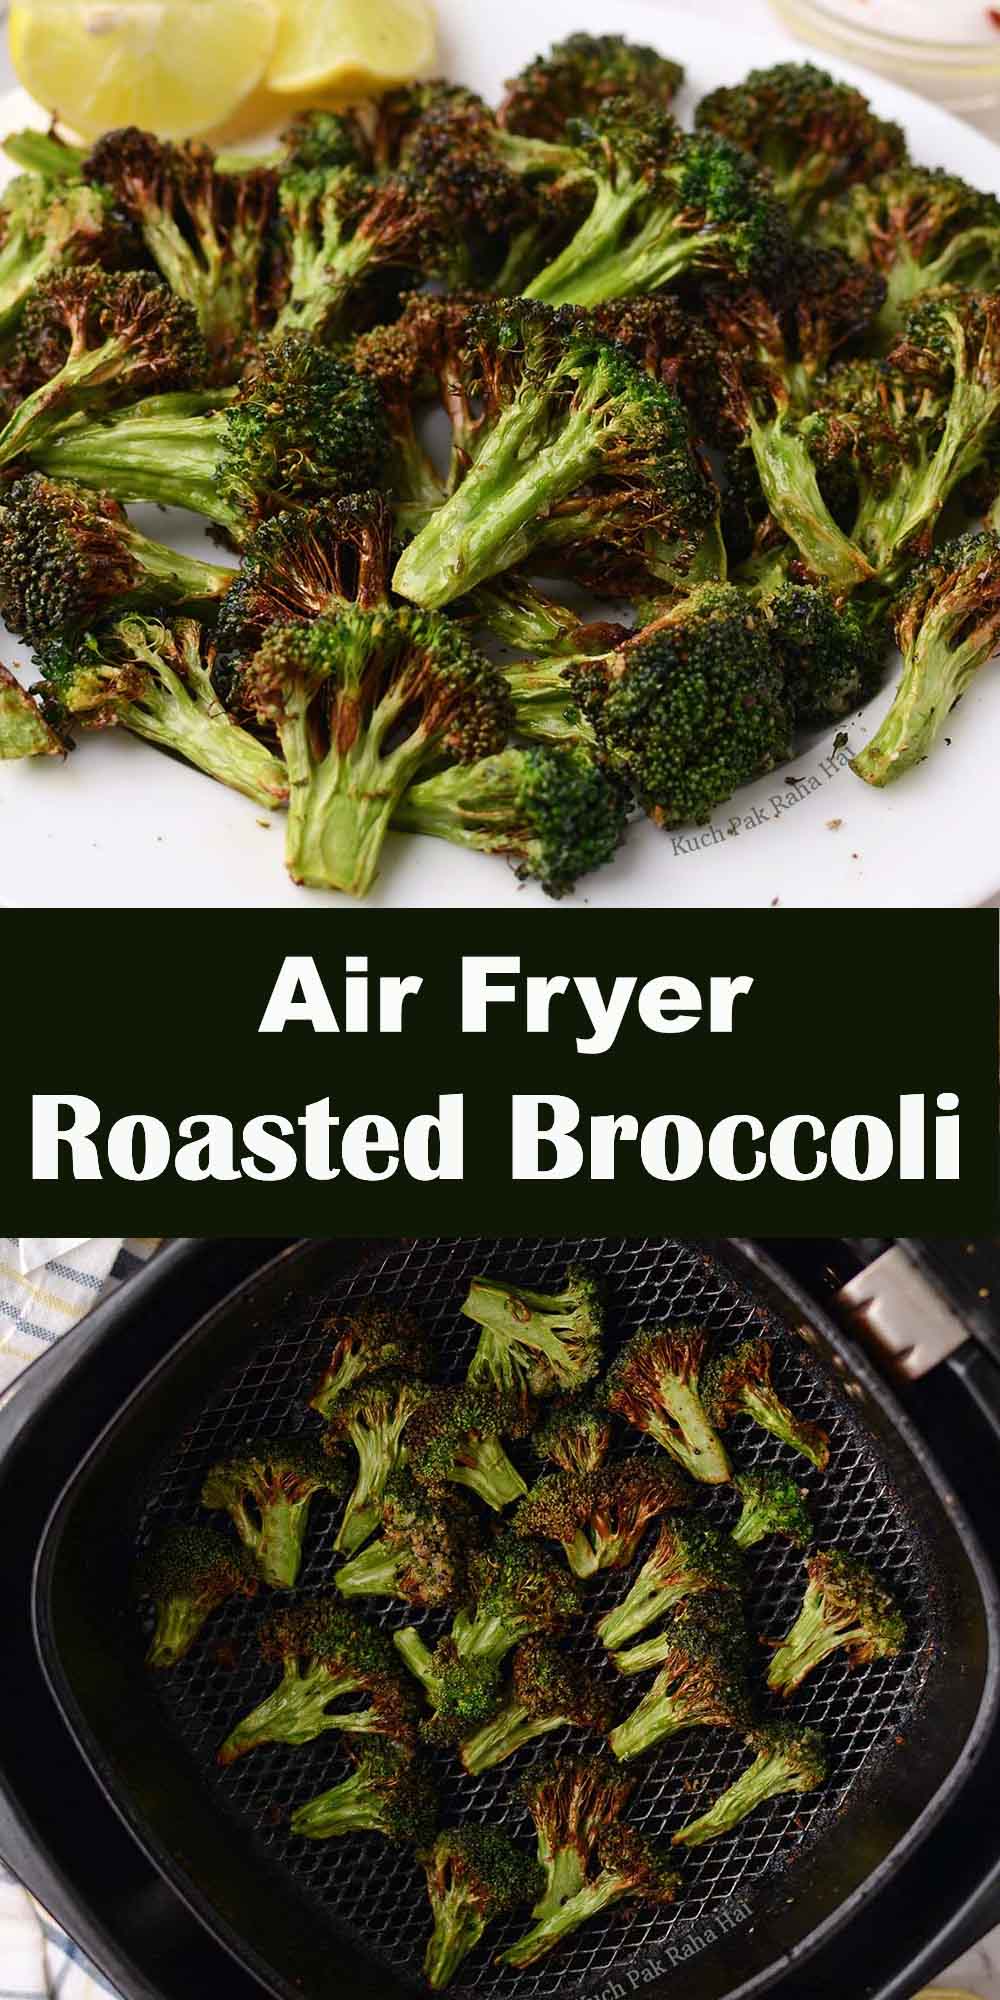 How to roast broccoli in air fryer.